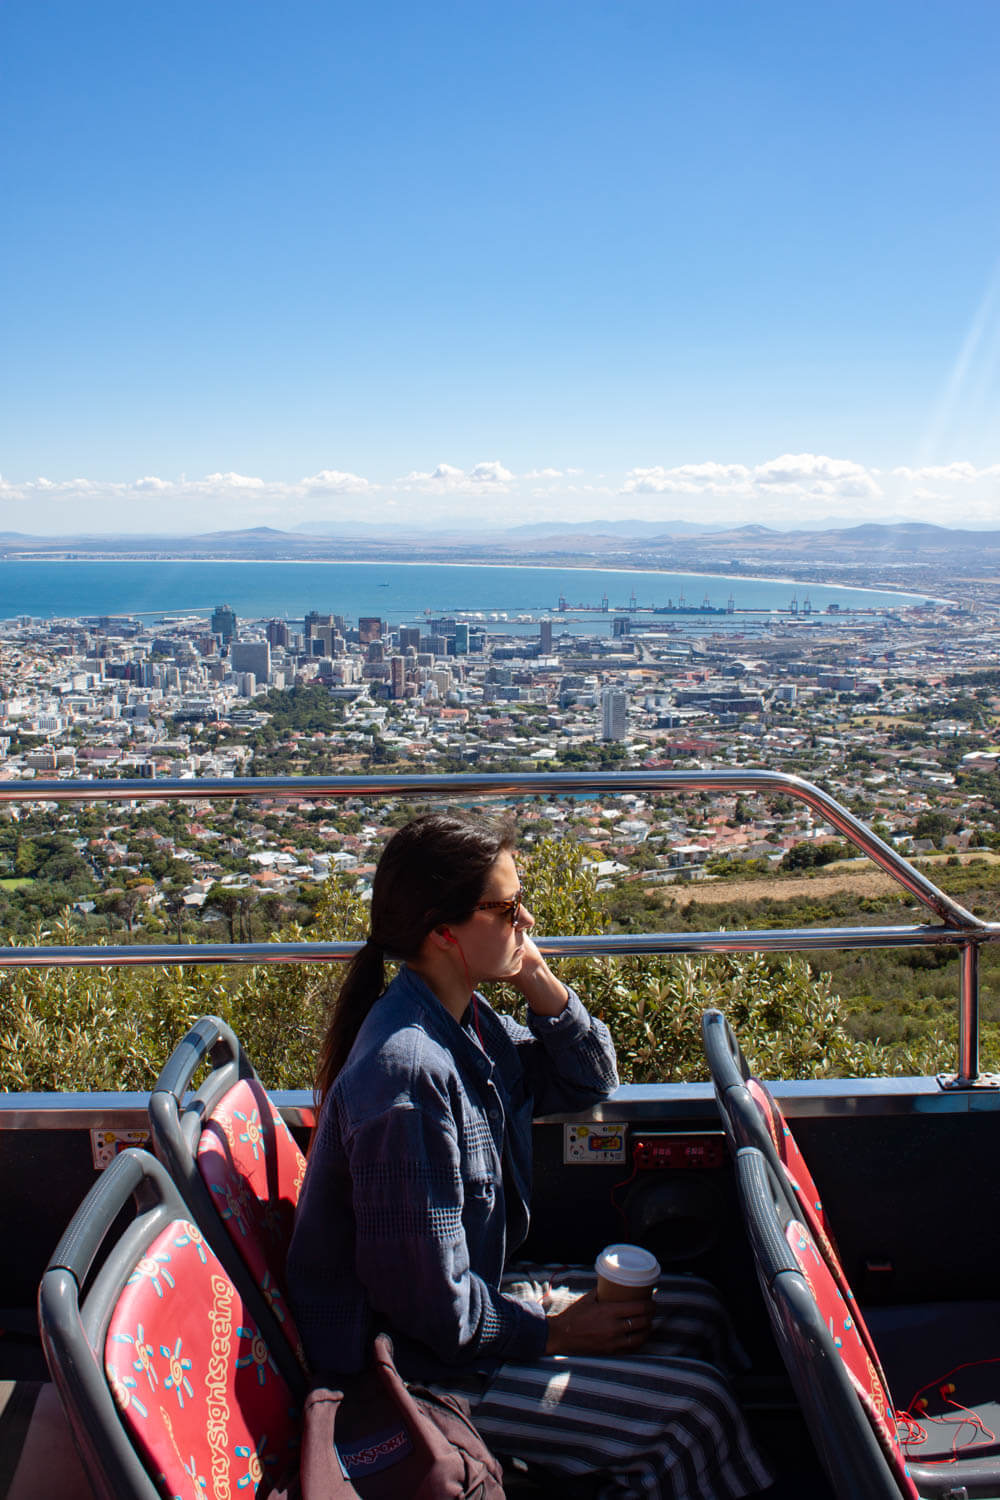 View of downtown Cape Town from the Table Mountain bus stop